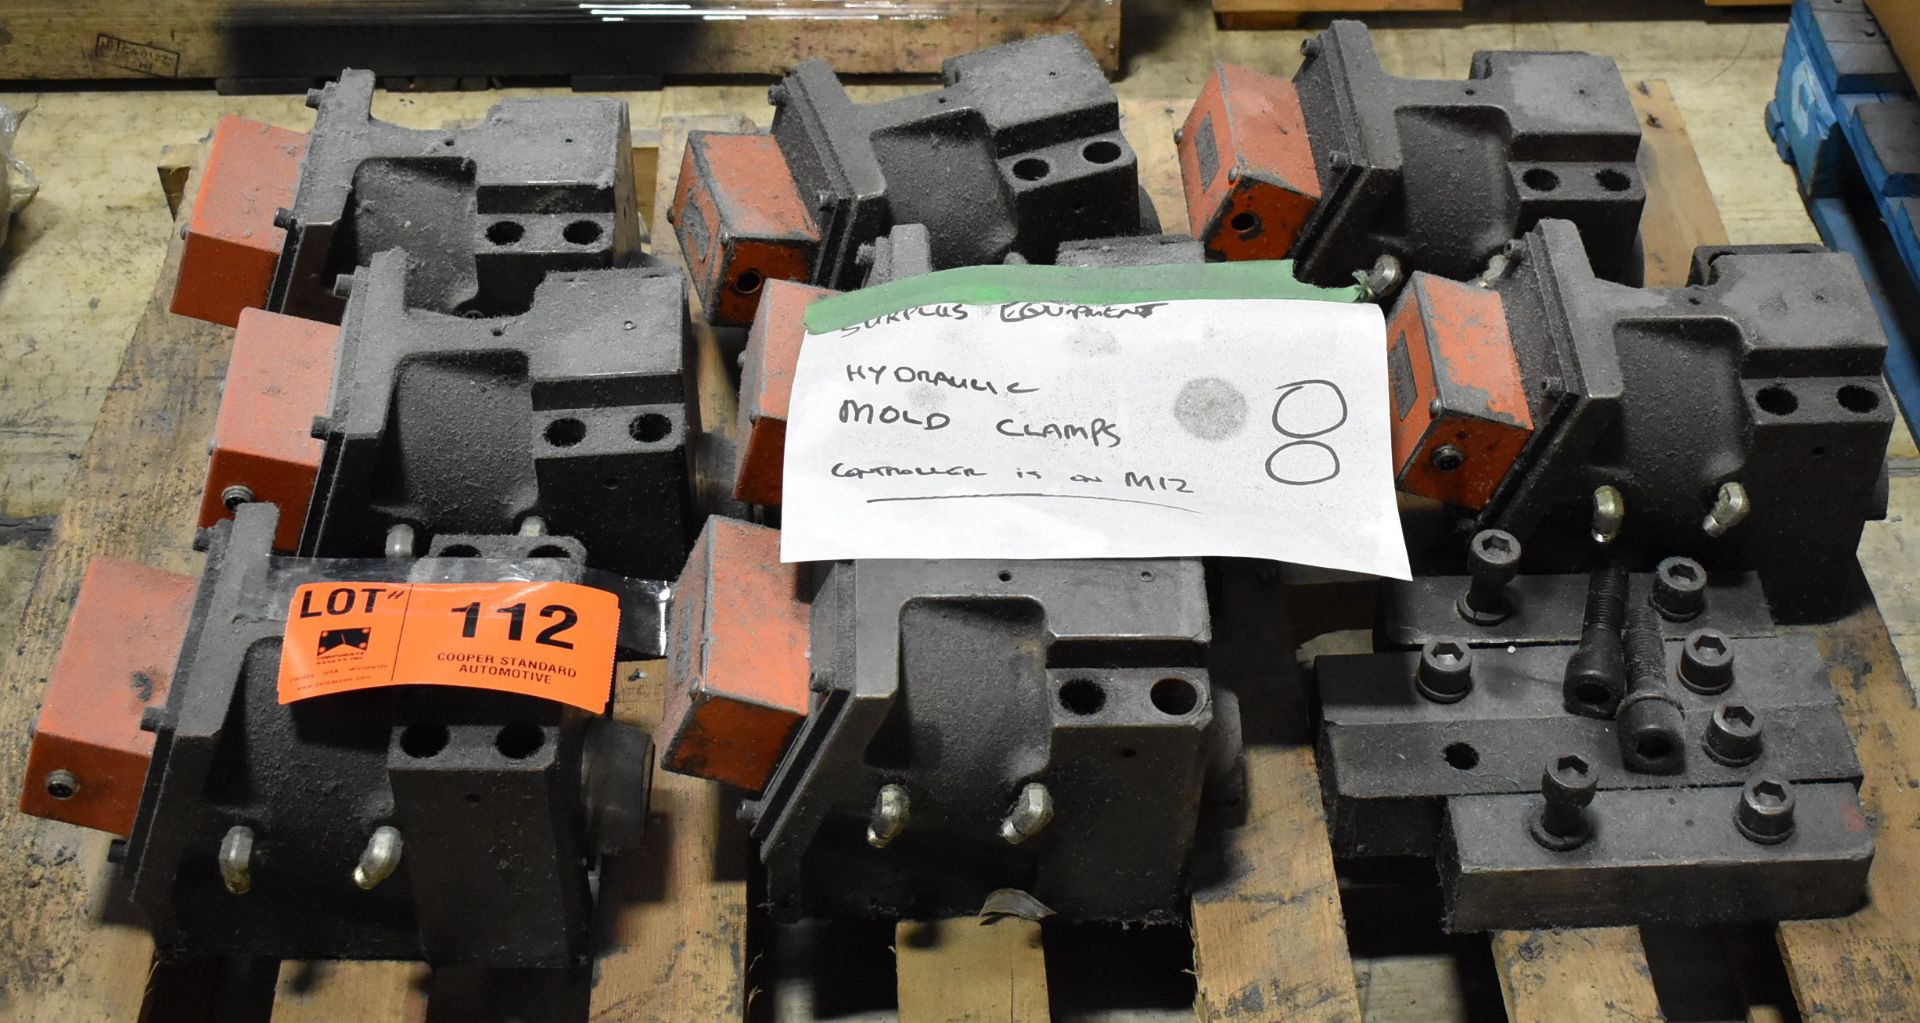 LOT/ (8) HYDRAULIC MOLD CLAMPS (LOCATED IN BRAMPTON, ON) [RIGGING FEES FOR LOT #112 - $25 CAD PLUS